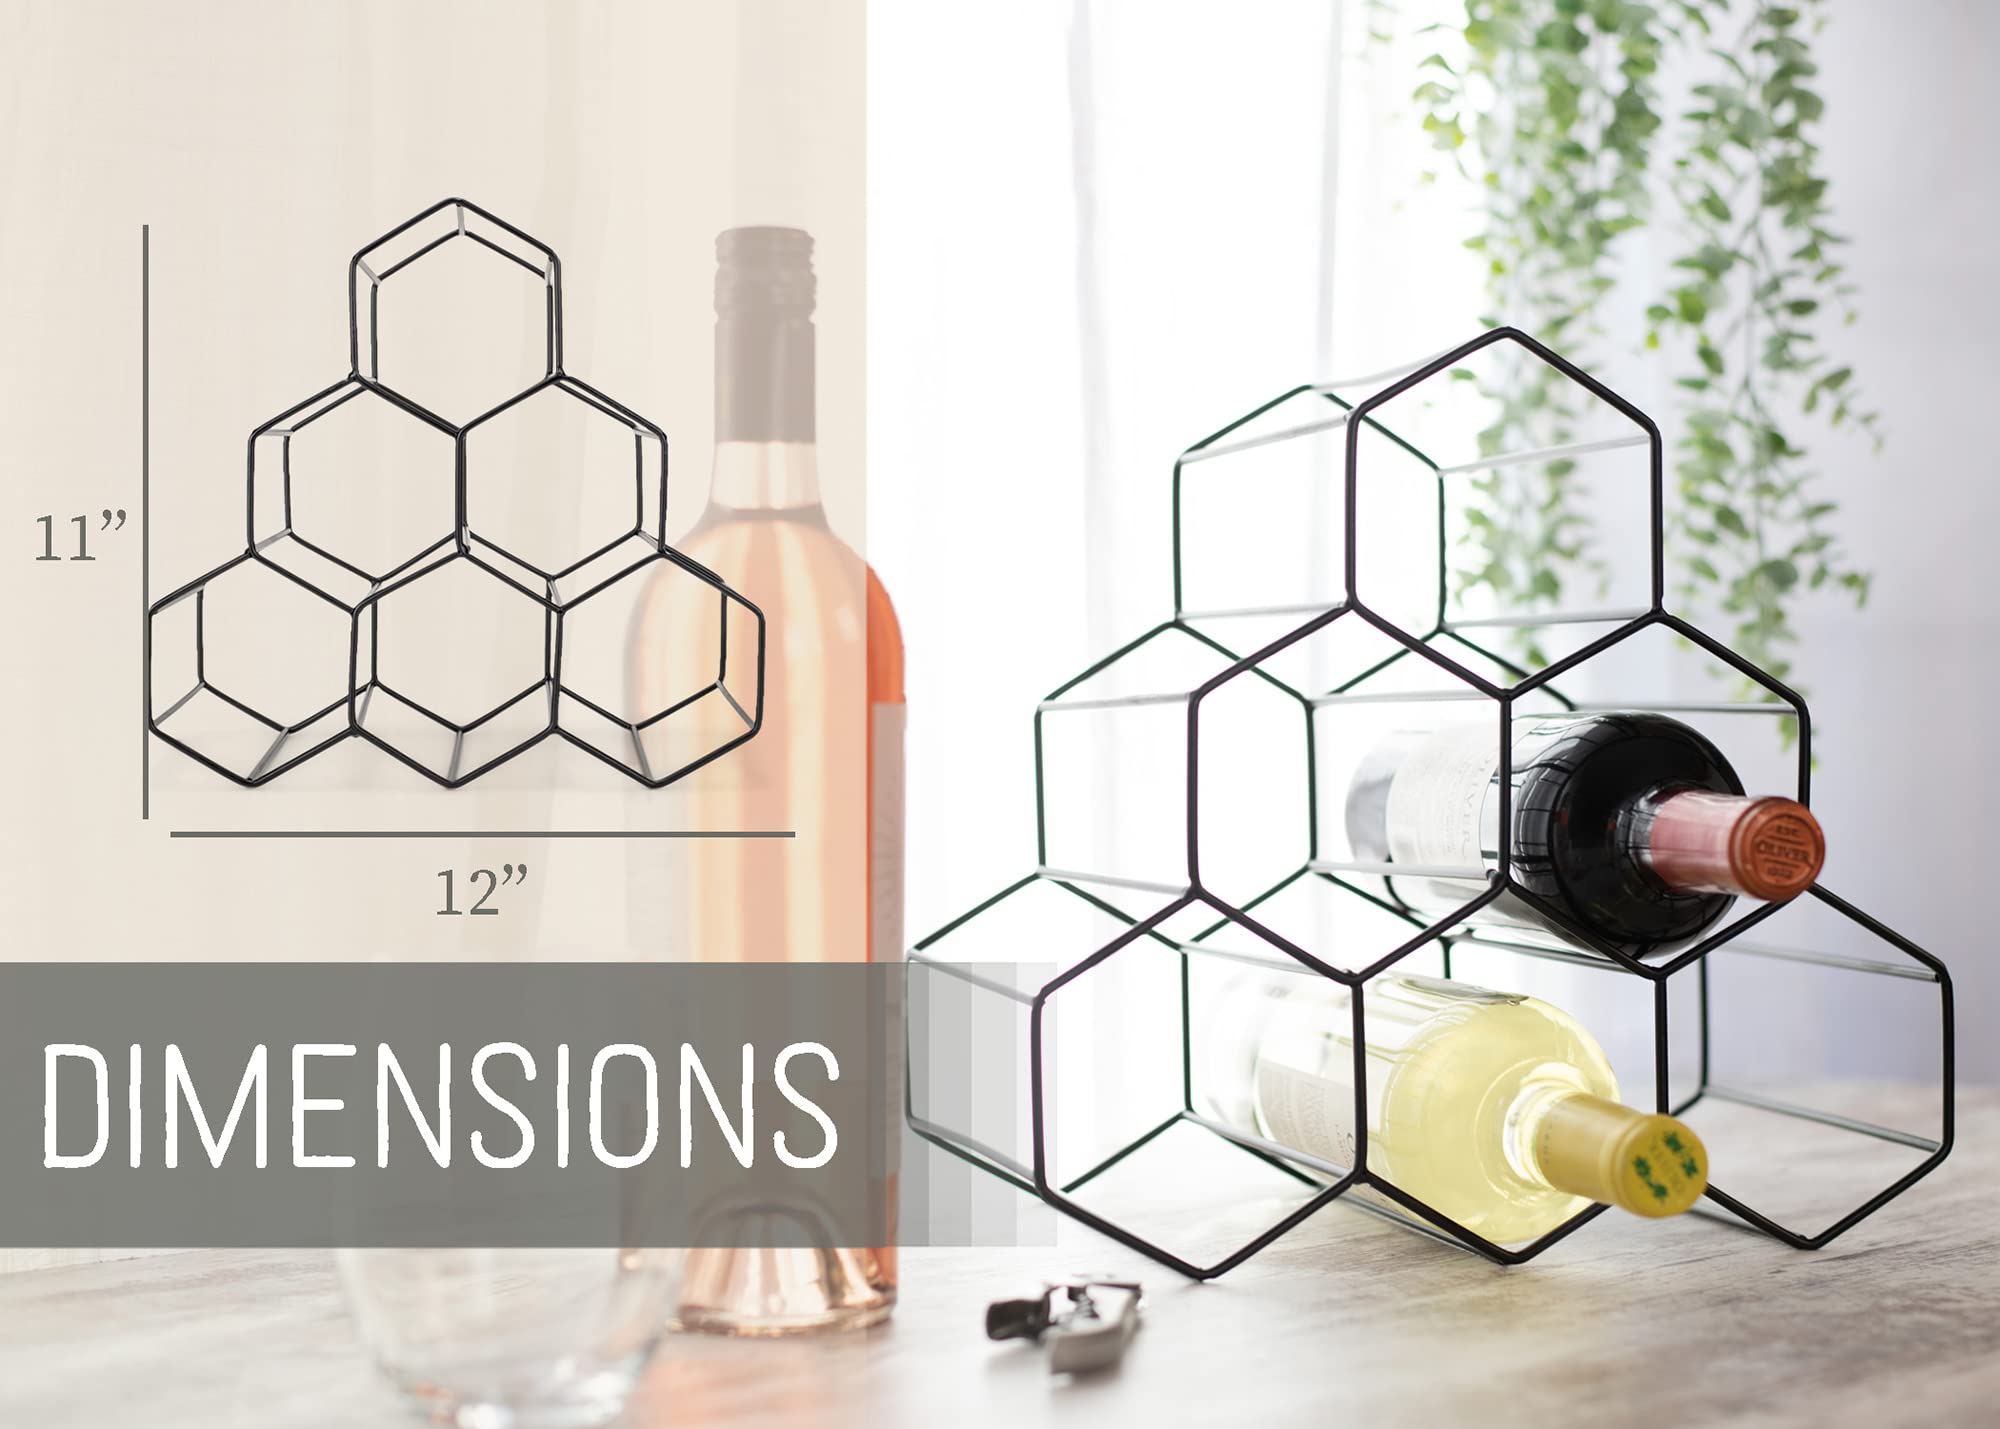 NAT & Jules Honeycomb Black Iron Metal Tabletop Wine Rack - Perfect for Kitchen Countertop, Pantry or Cabinets Display or Storage - Hold 6 Bottles, Black